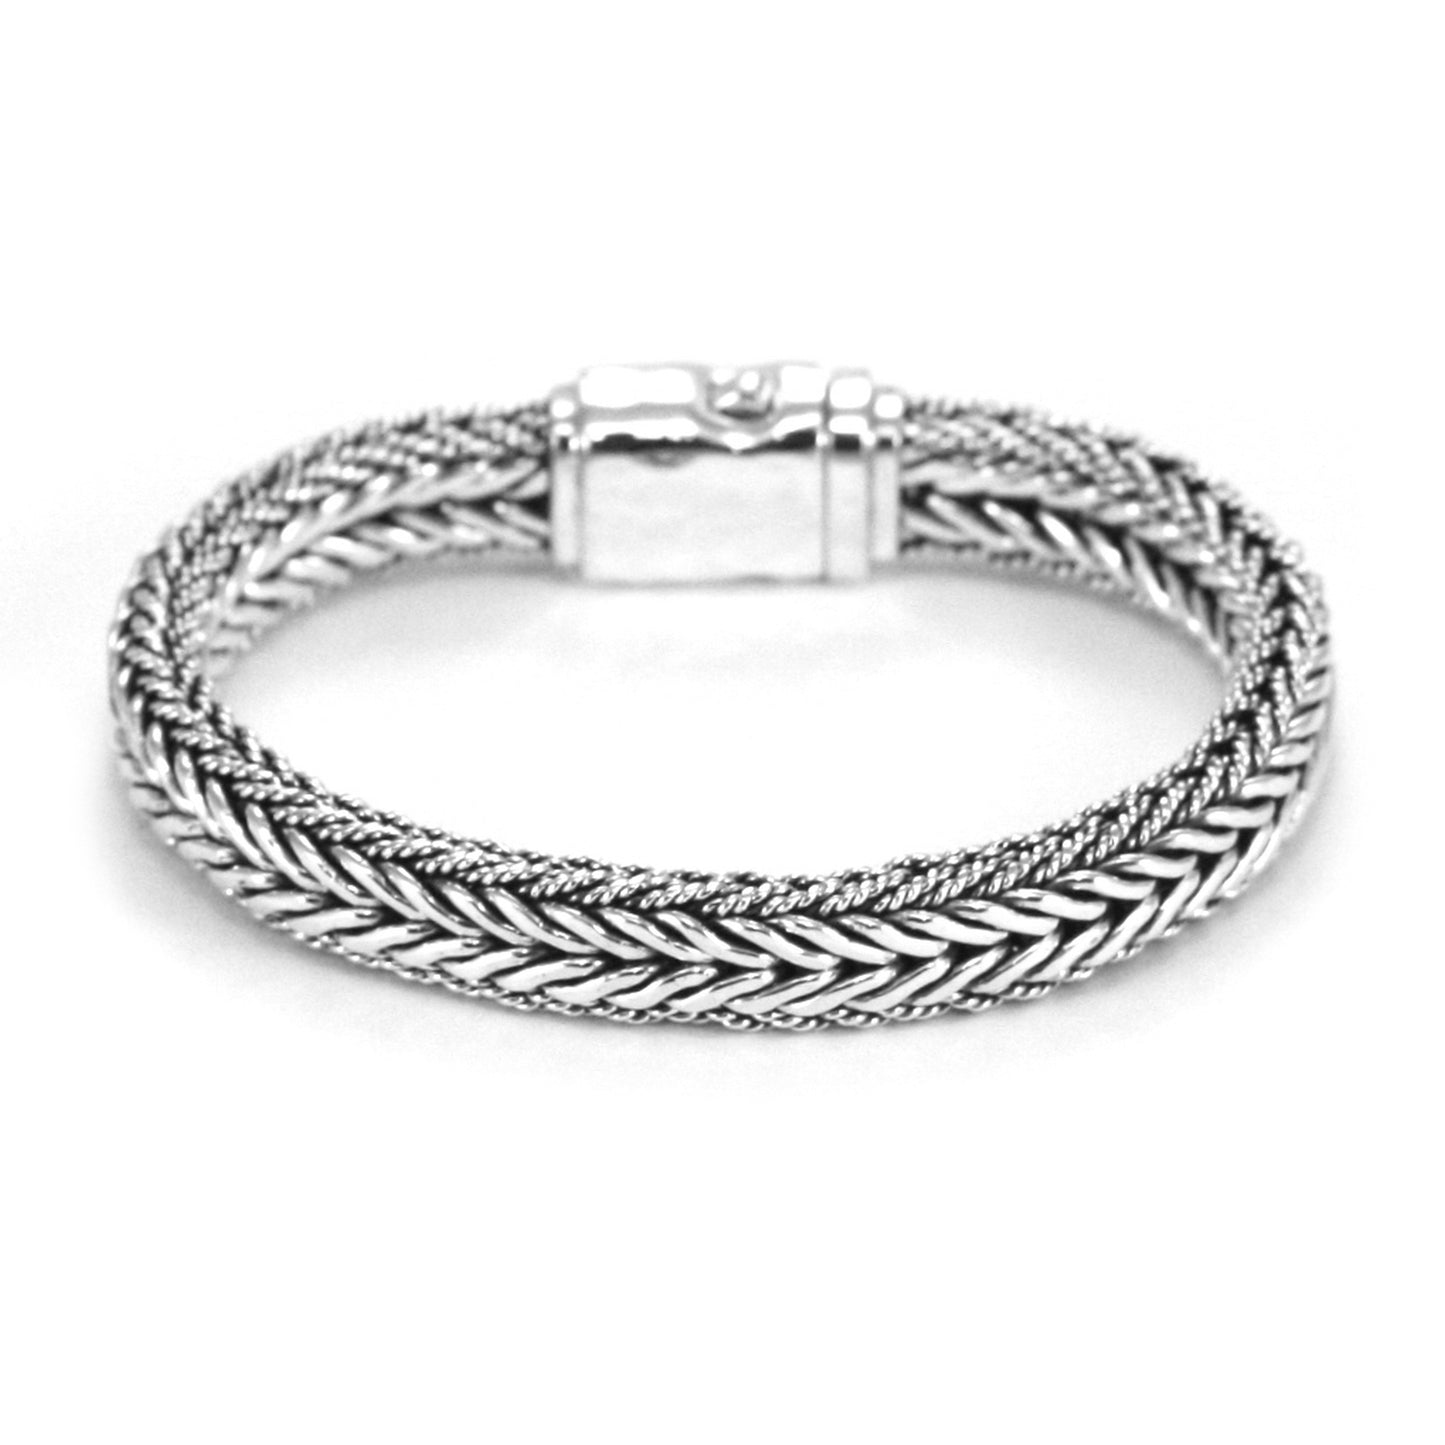 Wide silver snake chain bracelet with two textures and a hammered barrel clasp.